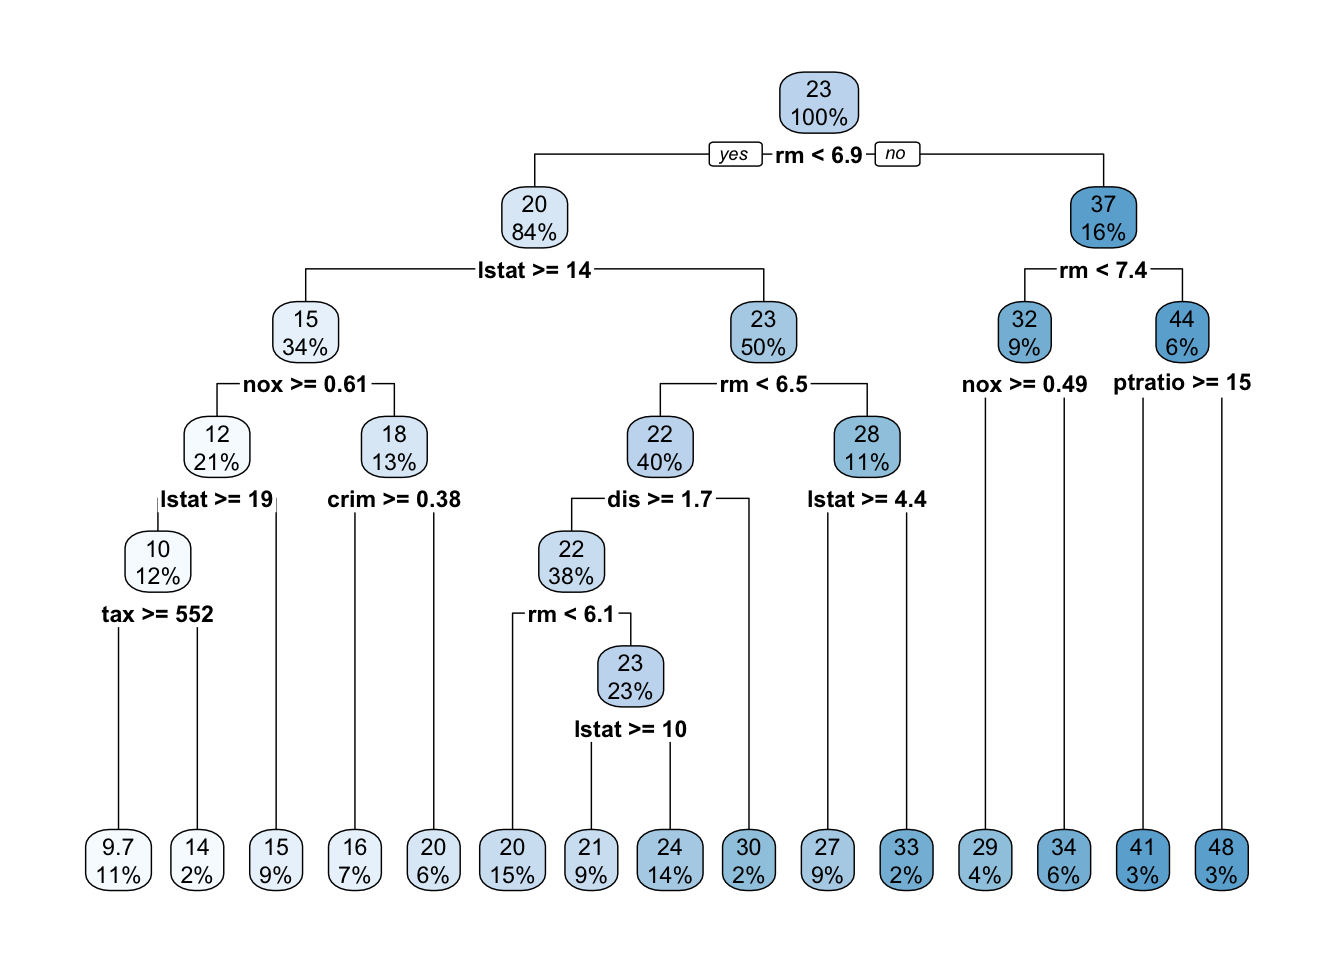 Decision tree chart. A total of 14 splits. Color is used to represent medv. Light blue colors represent small values, dark blue represent high values.